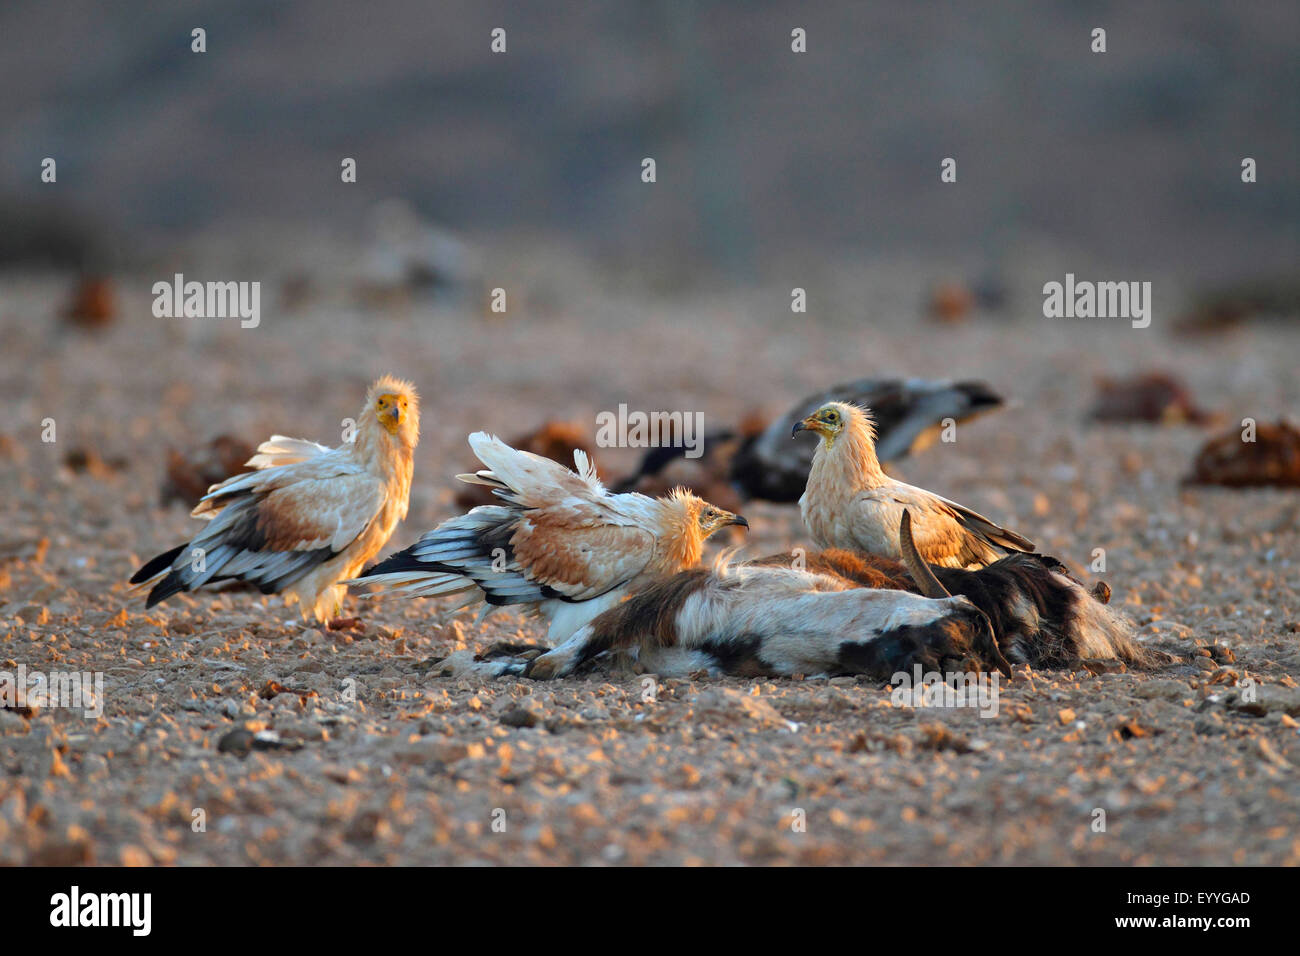 Egyptian vulture (Neophron percnopterus), several vultures feeding at a goat, Canary Islands, Fuerteventura Stock Photo